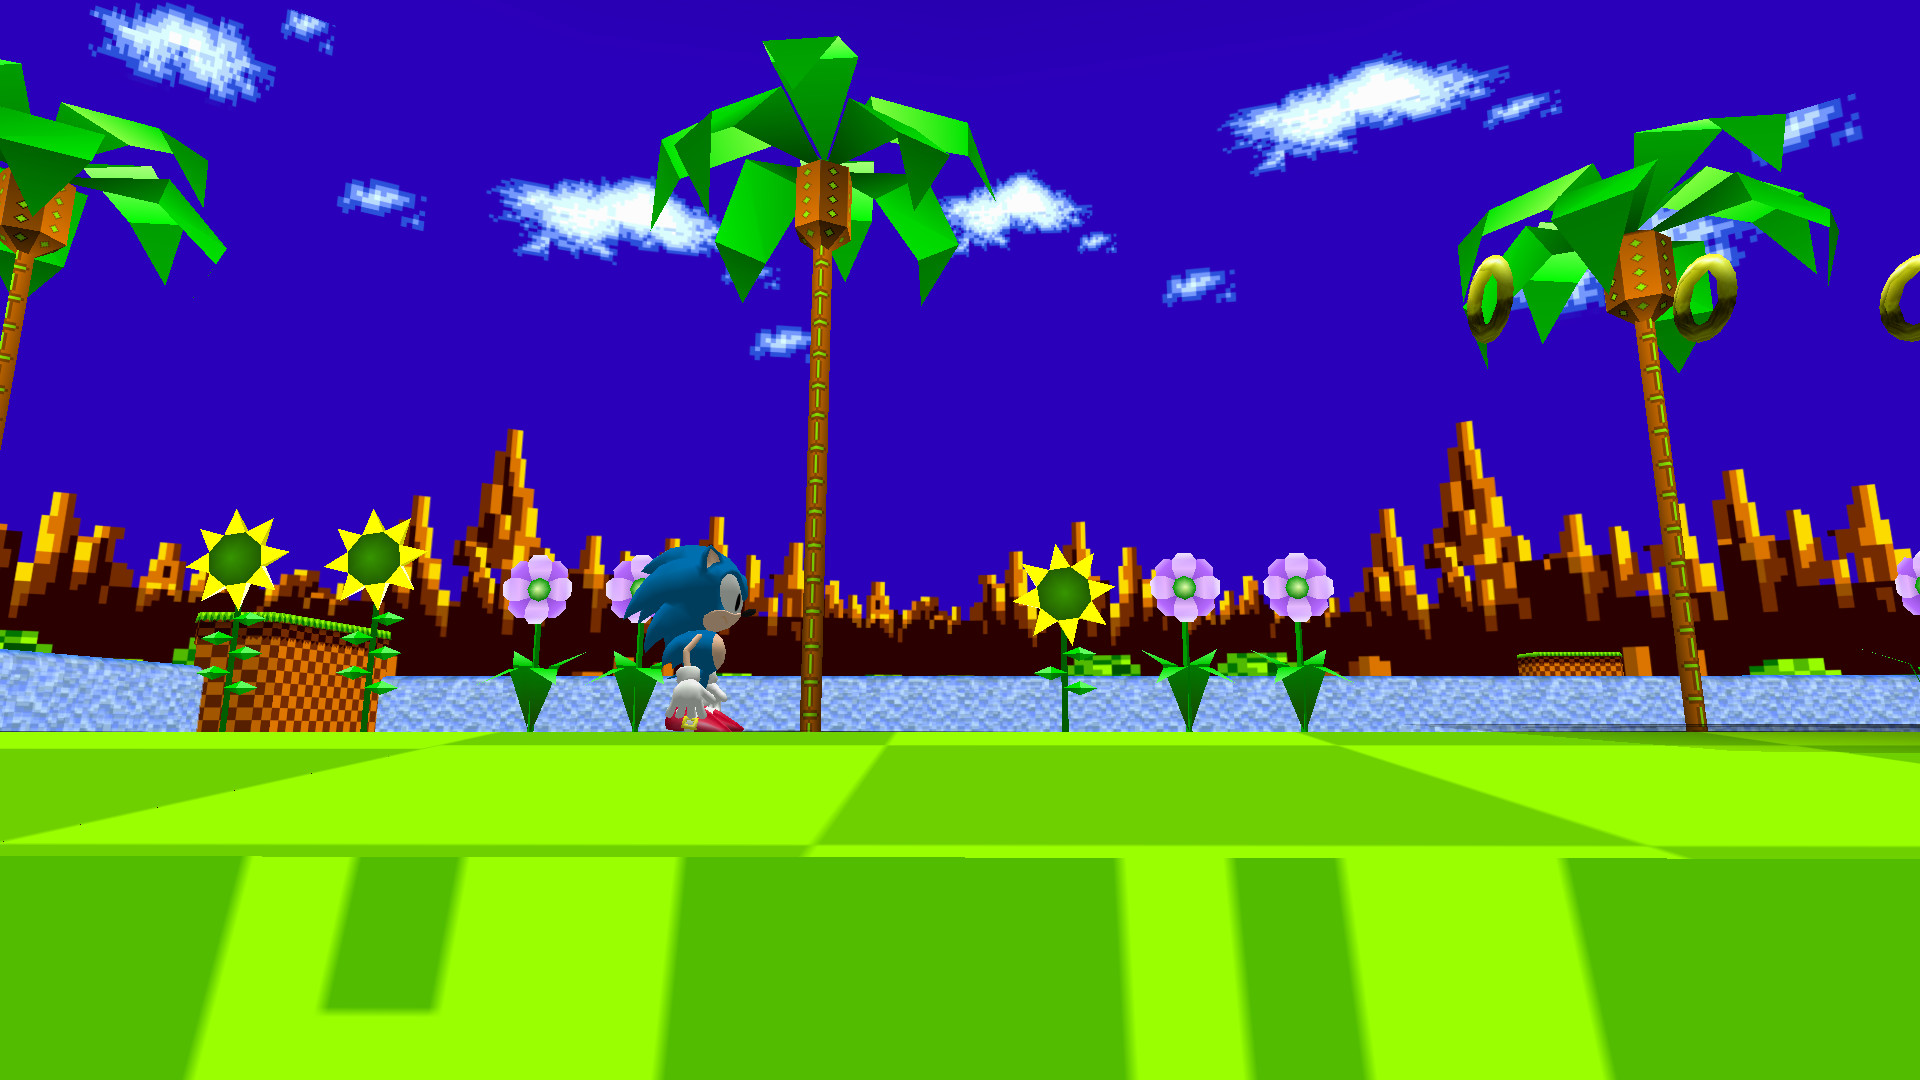 Genesis / 32X / SCD - Sonic the Hedgehog - Objects (Common) - The